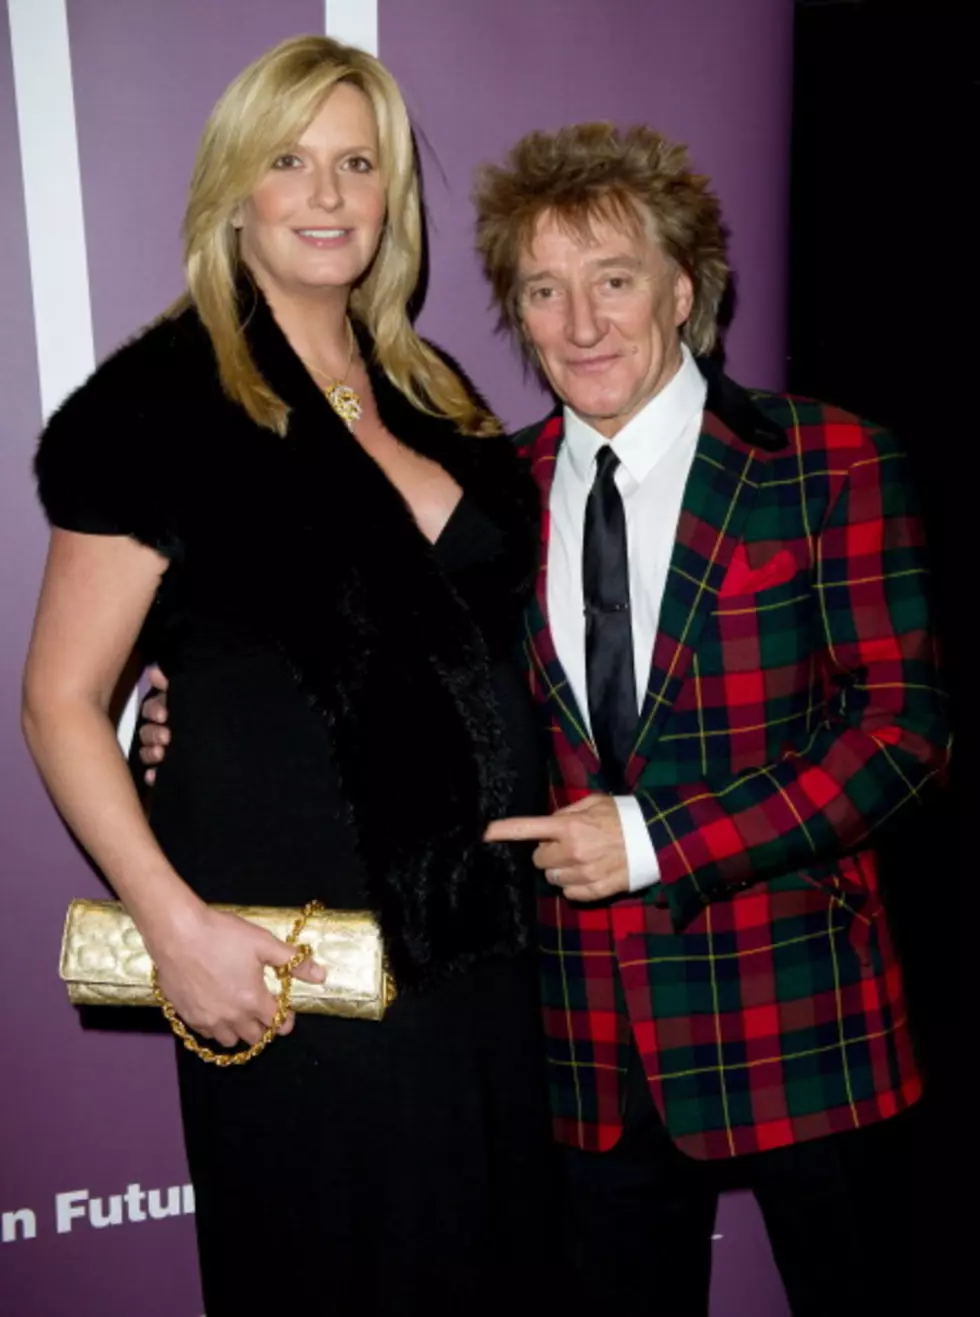 Rod Stewart A Dad For The 8th Time!